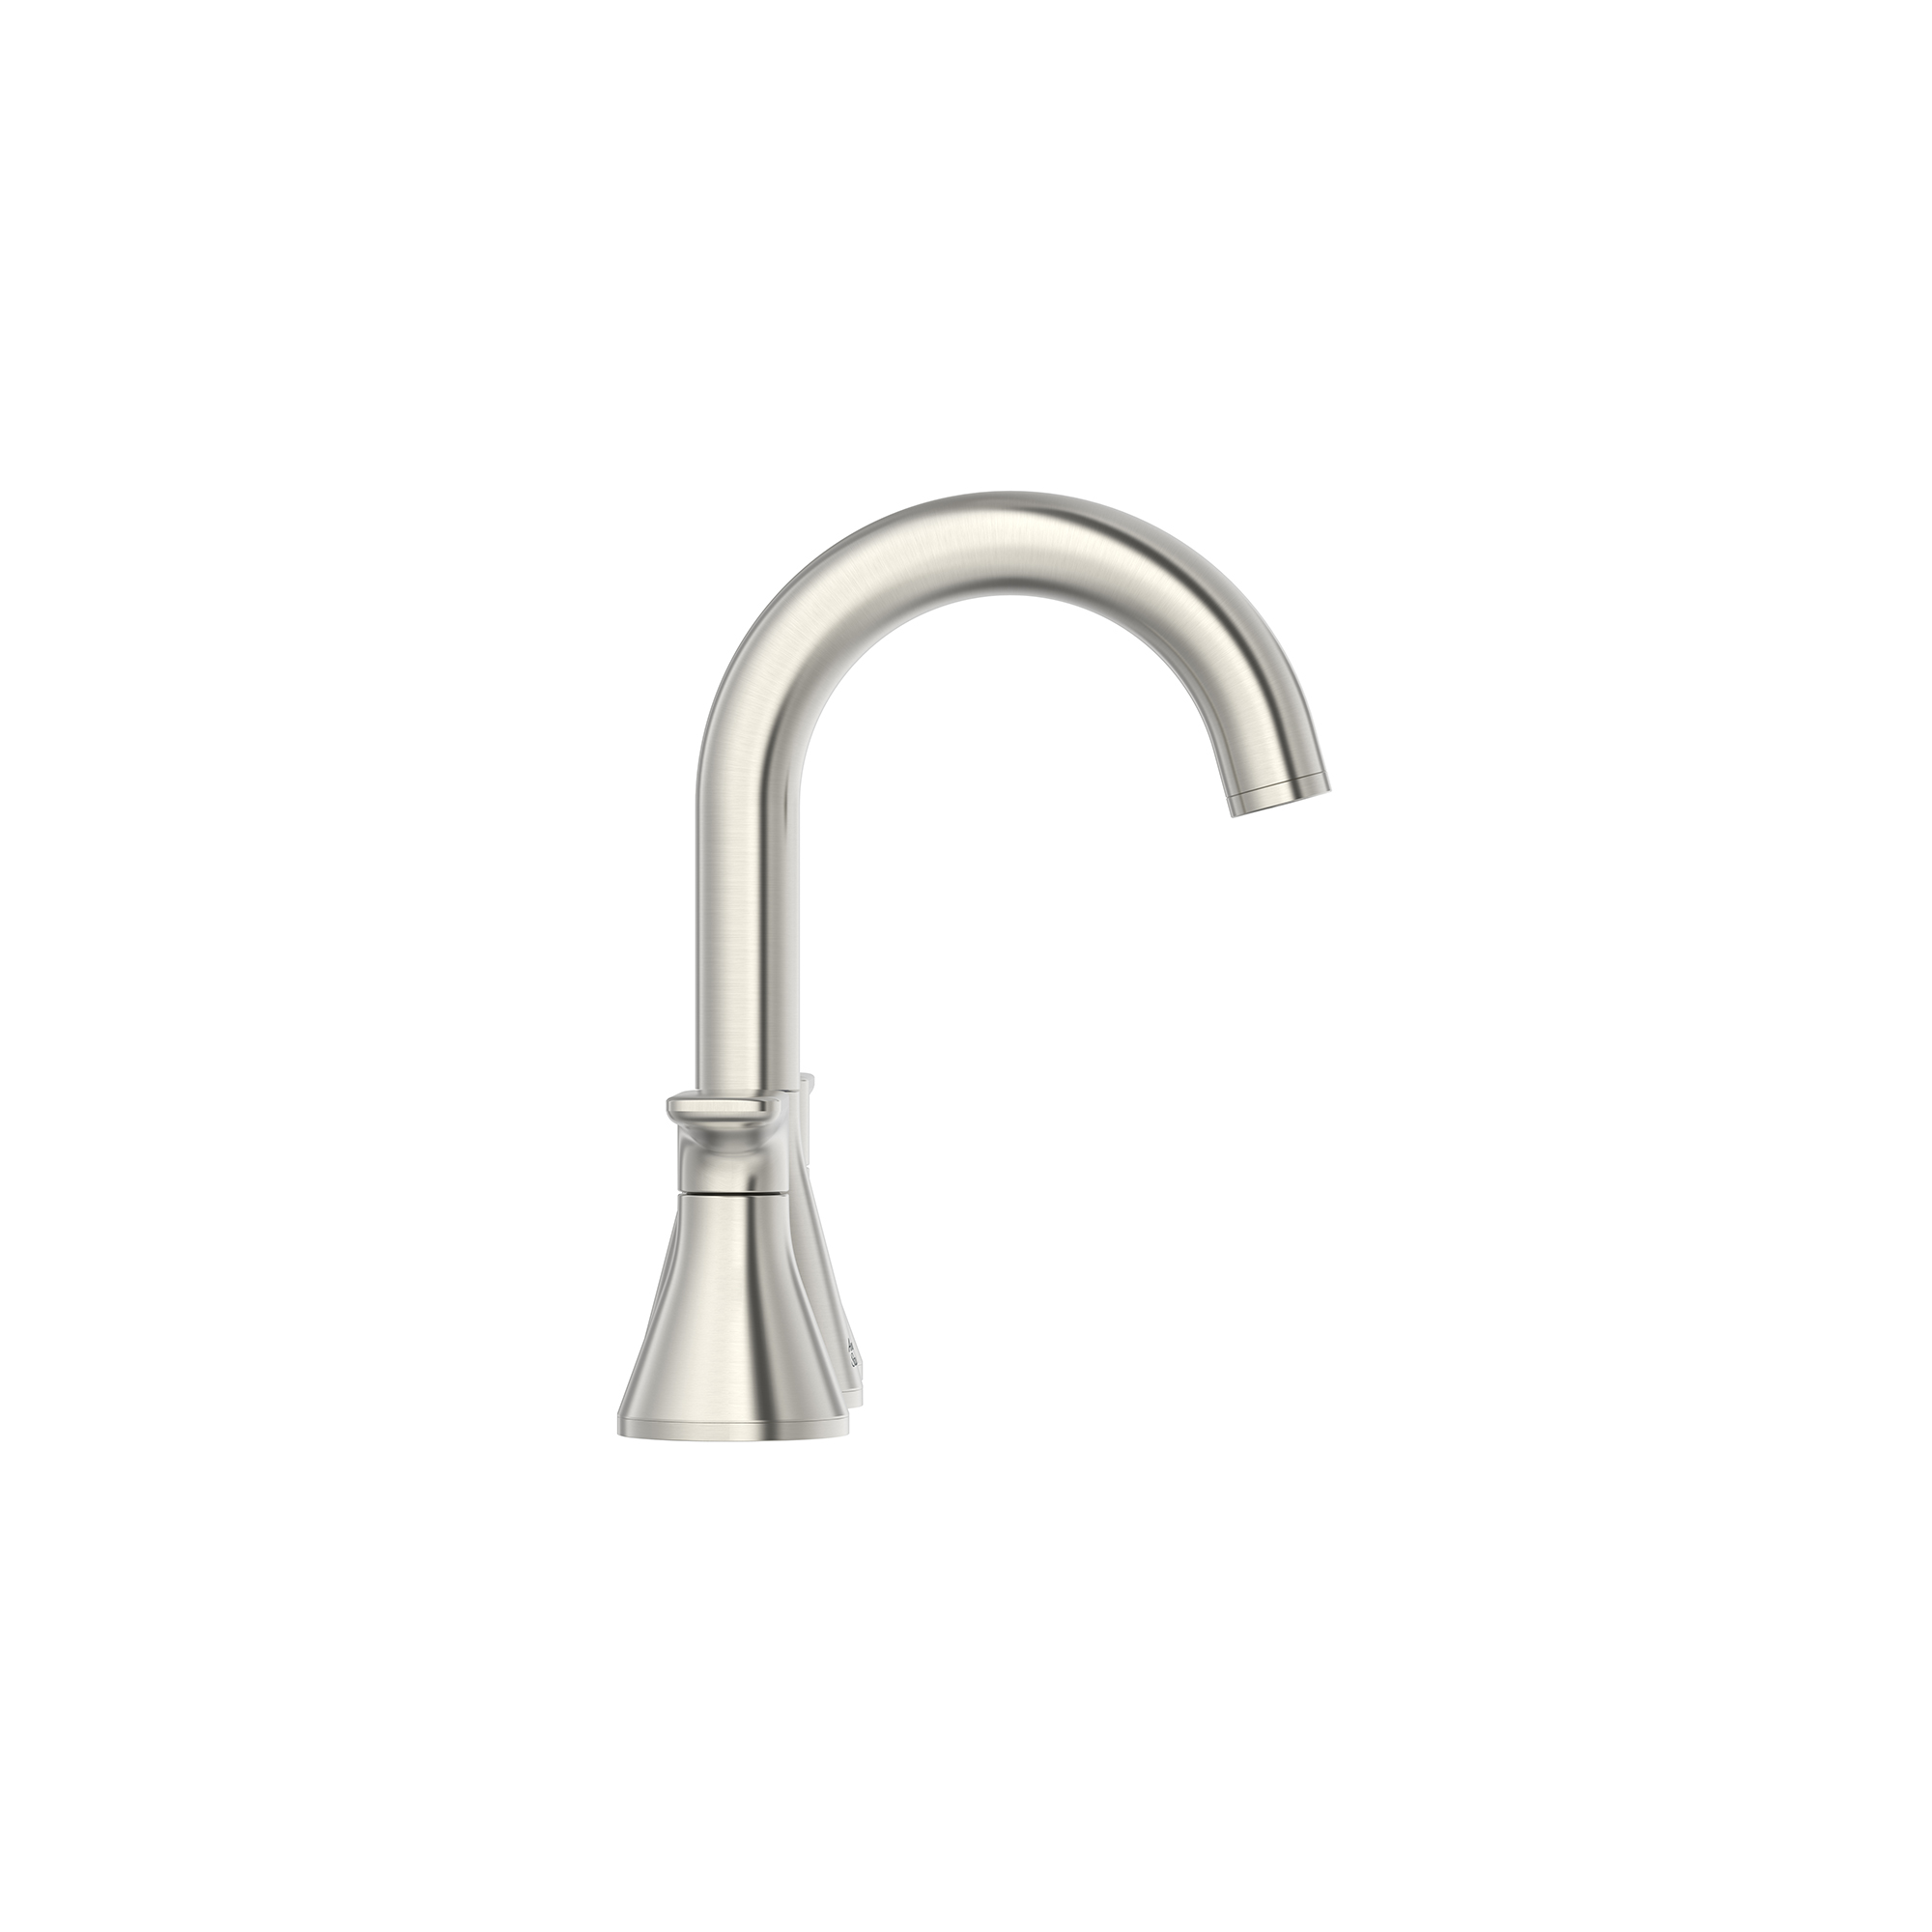 Aspirations™ 8-Inch Widespread 2-Handle Bathroom Faucet 1.2 gpm/4.5 L/min With Lever Handles